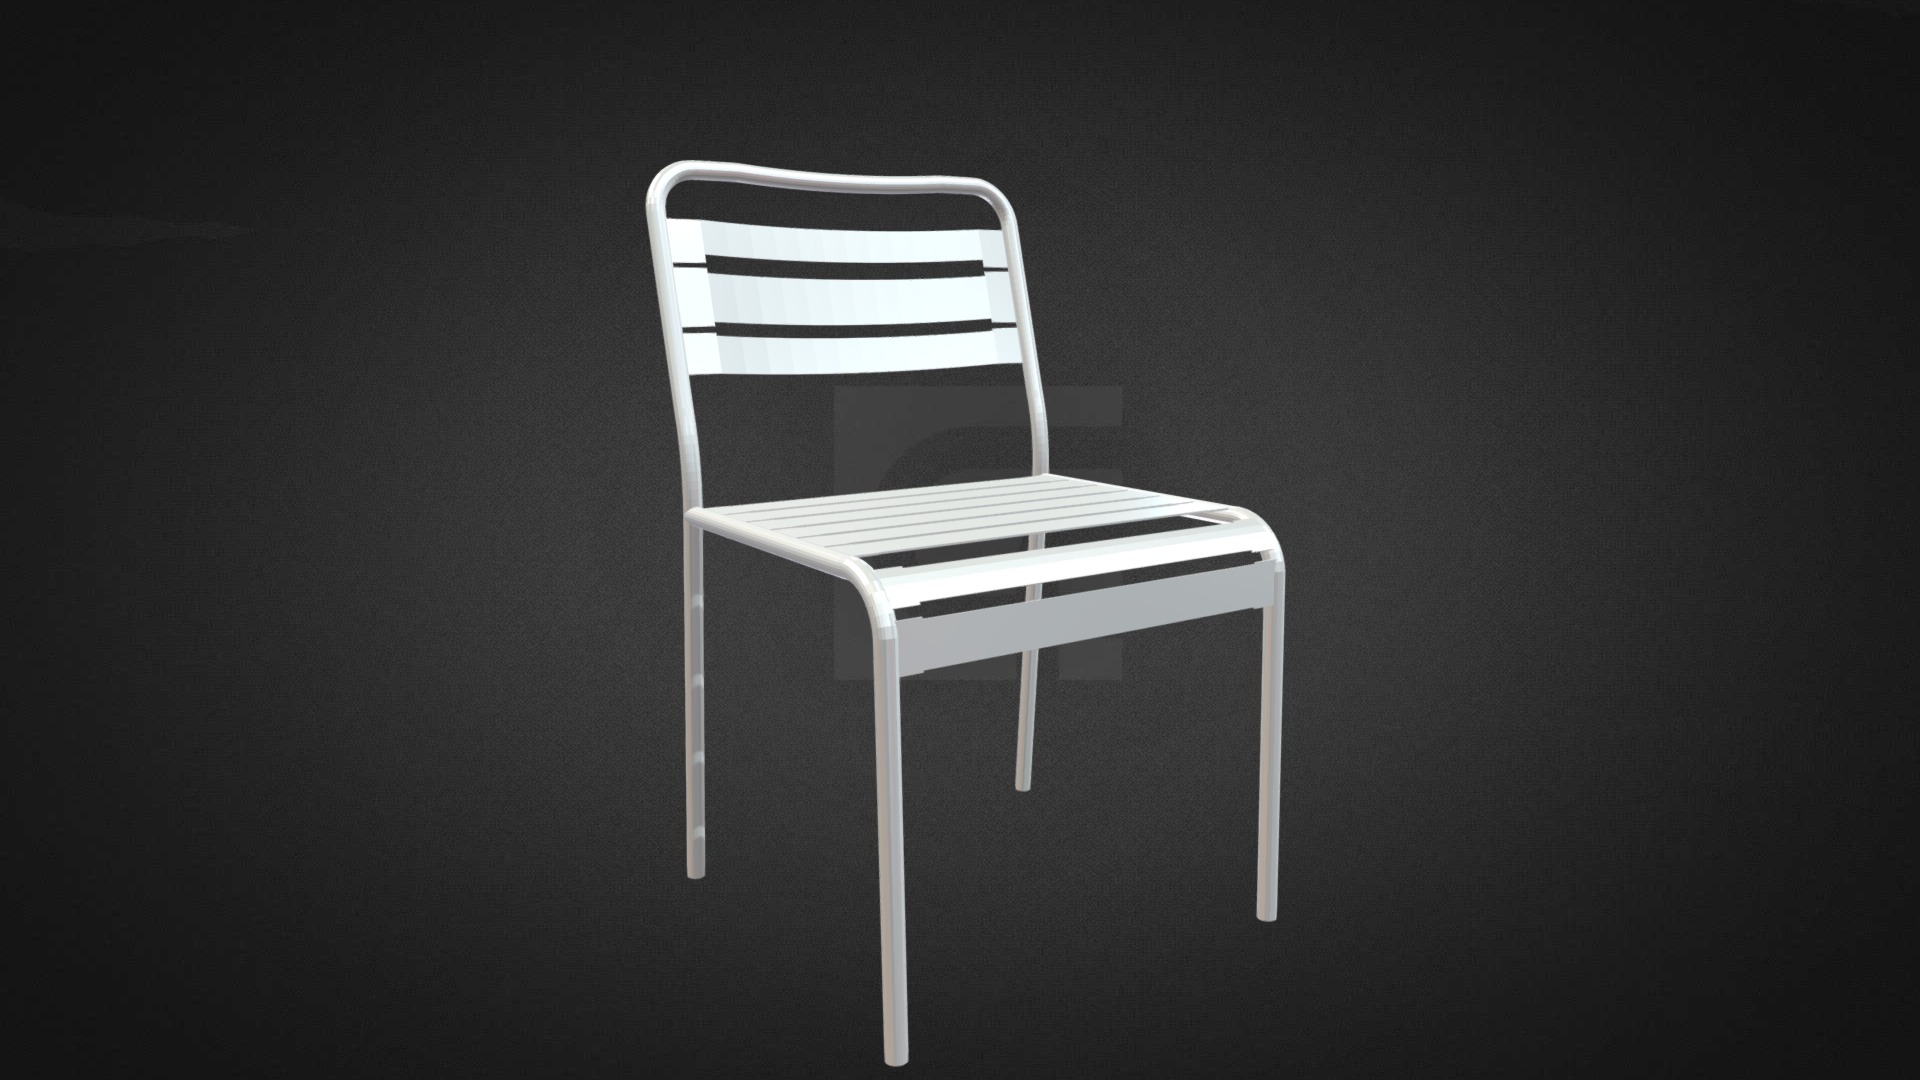 3D model Ellis Chair Hire - This is a 3D model of the Ellis Chair Hire. The 3D model is about a white chair with a black background.